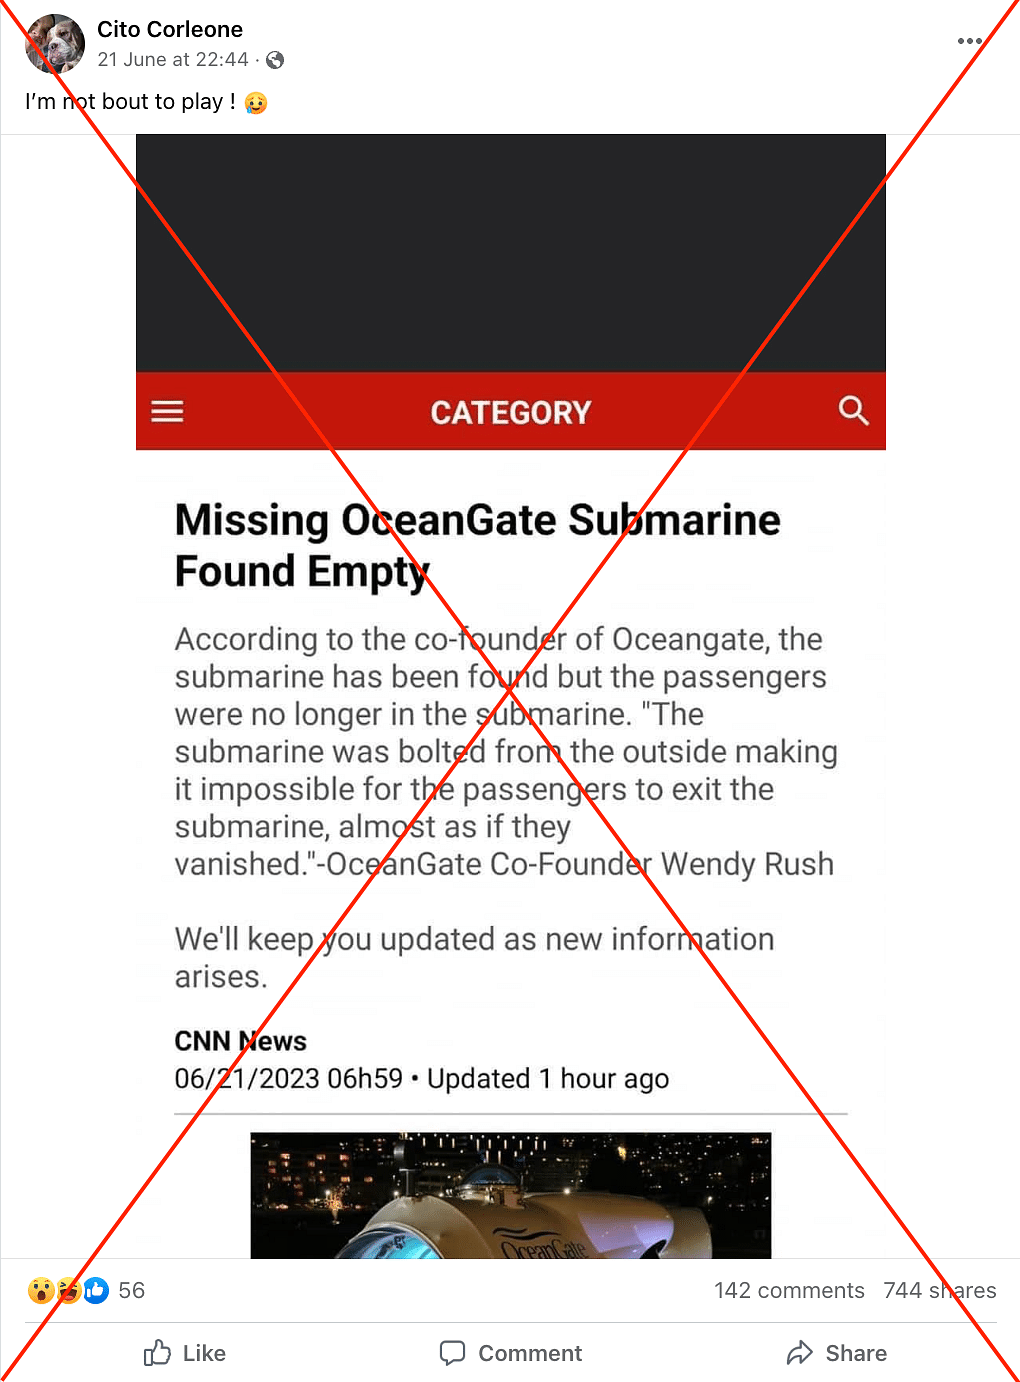 The screenshot of the CNN article in the viral claim about OceanGate's TItan submersible is fabricated.